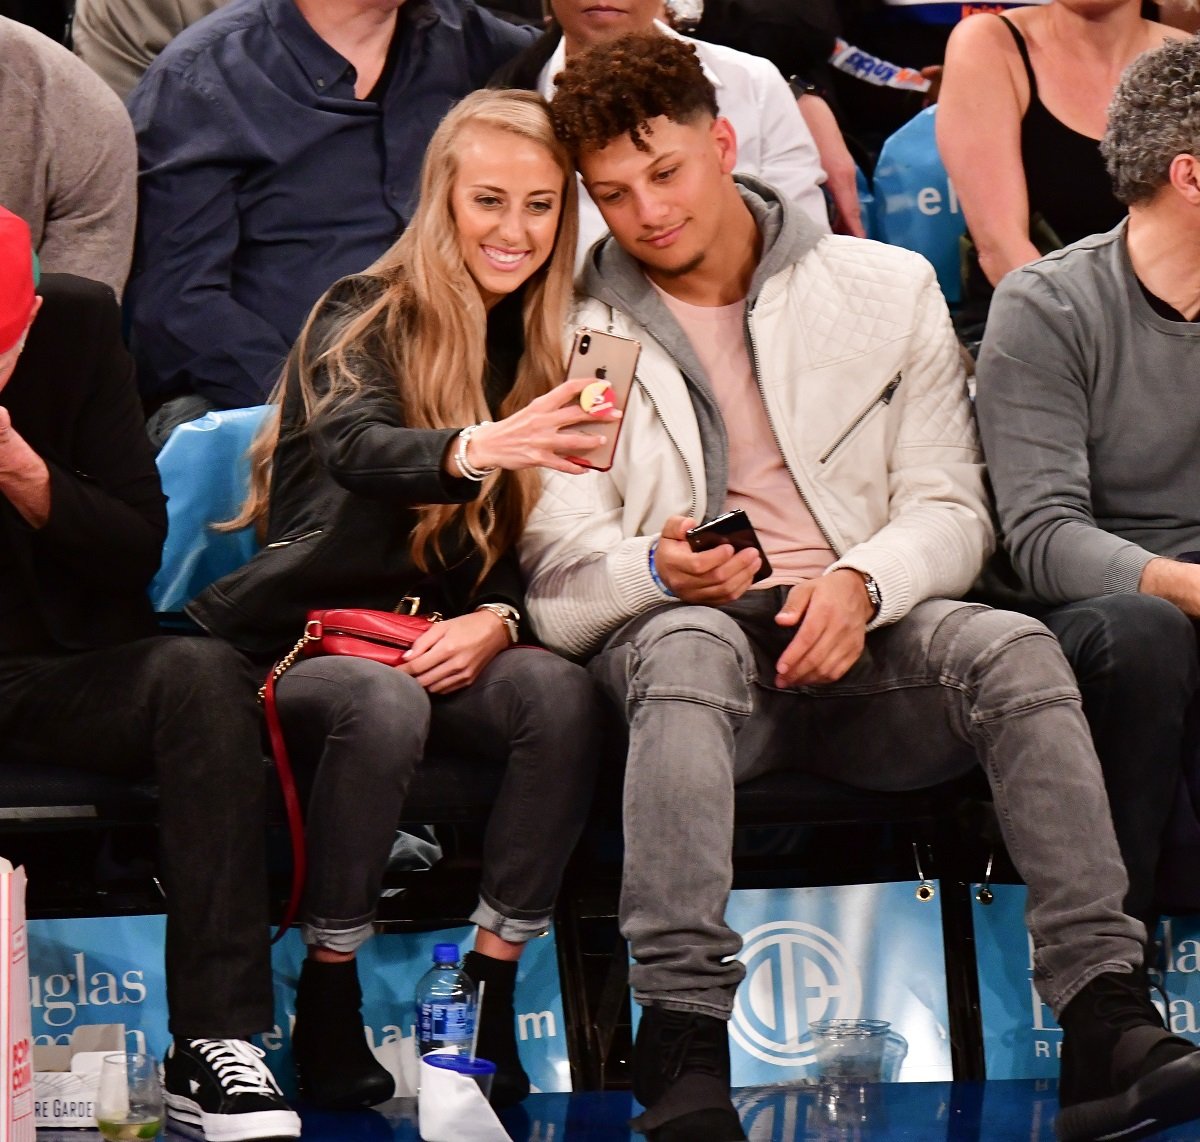 Brittany Matthews and Patrick Mahomes taking a selfie during an NBA game at Madison Square Garden